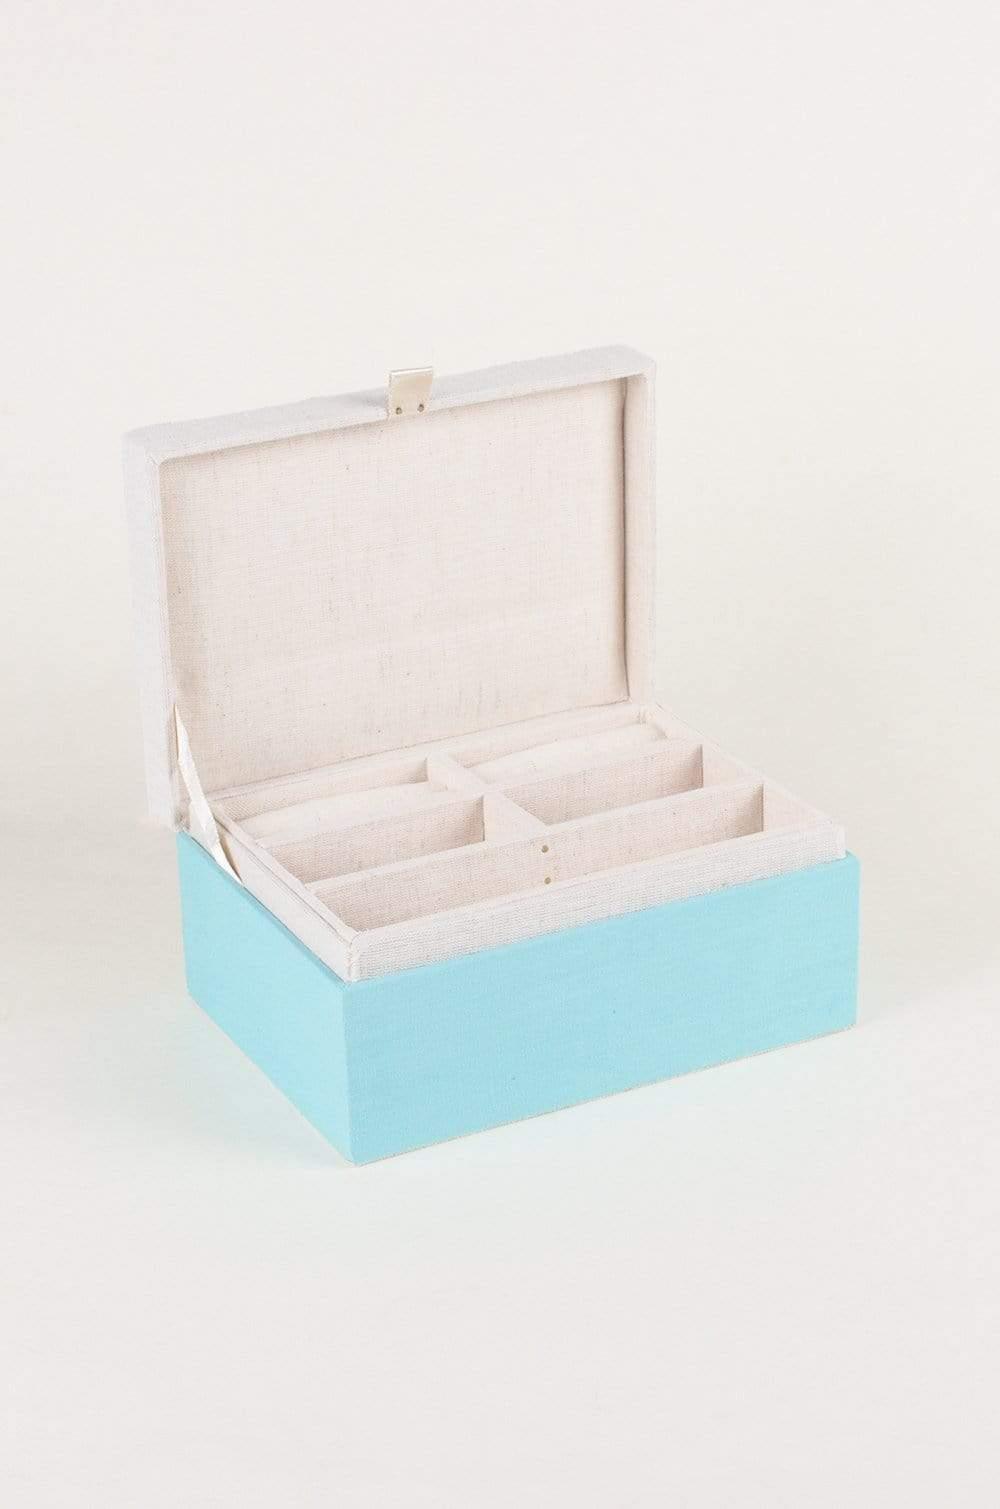 Pastel Perfection Jewellery BoxMaterial: Made of Fabric, Beads and MDF
Dimensions: 7L X 5W X 3H "Inches

Do not wash. Wipe dry. Keep away from dust and moisture, avoid dragging sharp or rough objePastel Perfection Jewellery Box